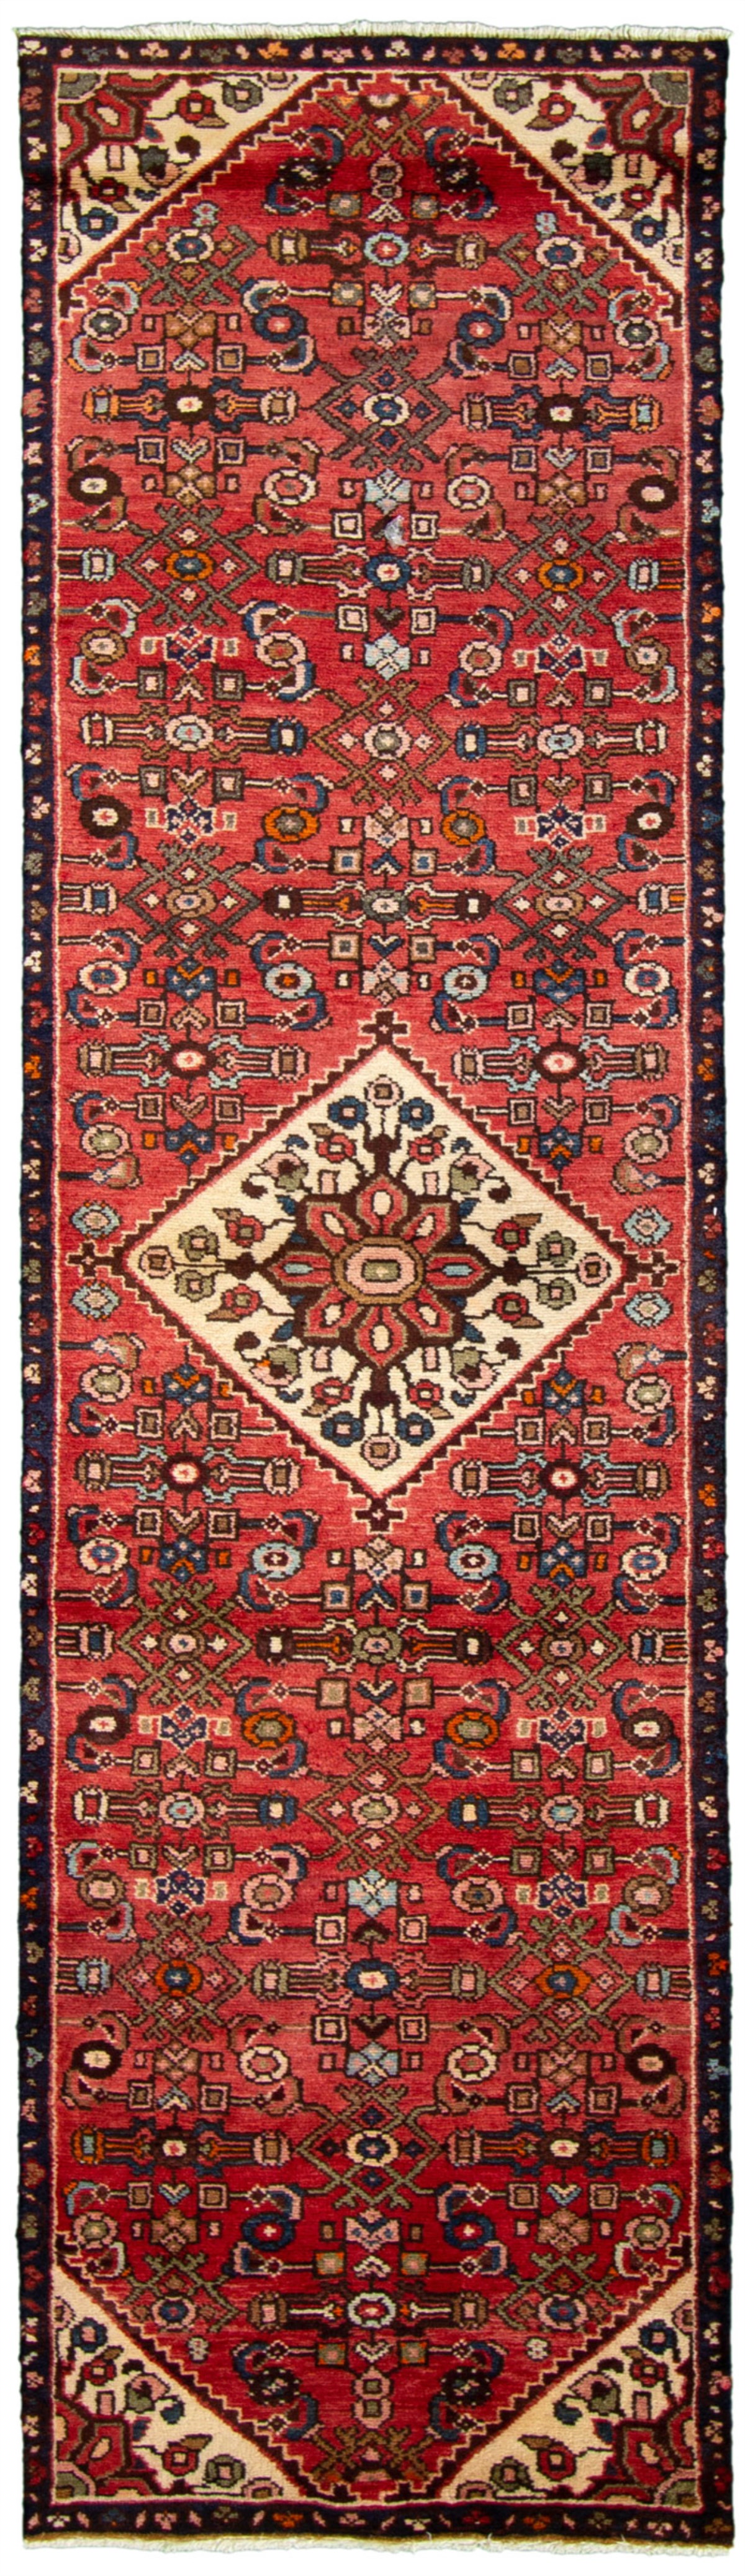 Hand-knotted Hamadan Red Wool Rug 2'7" x 9'5" Size: 2'7" x 9'5"  